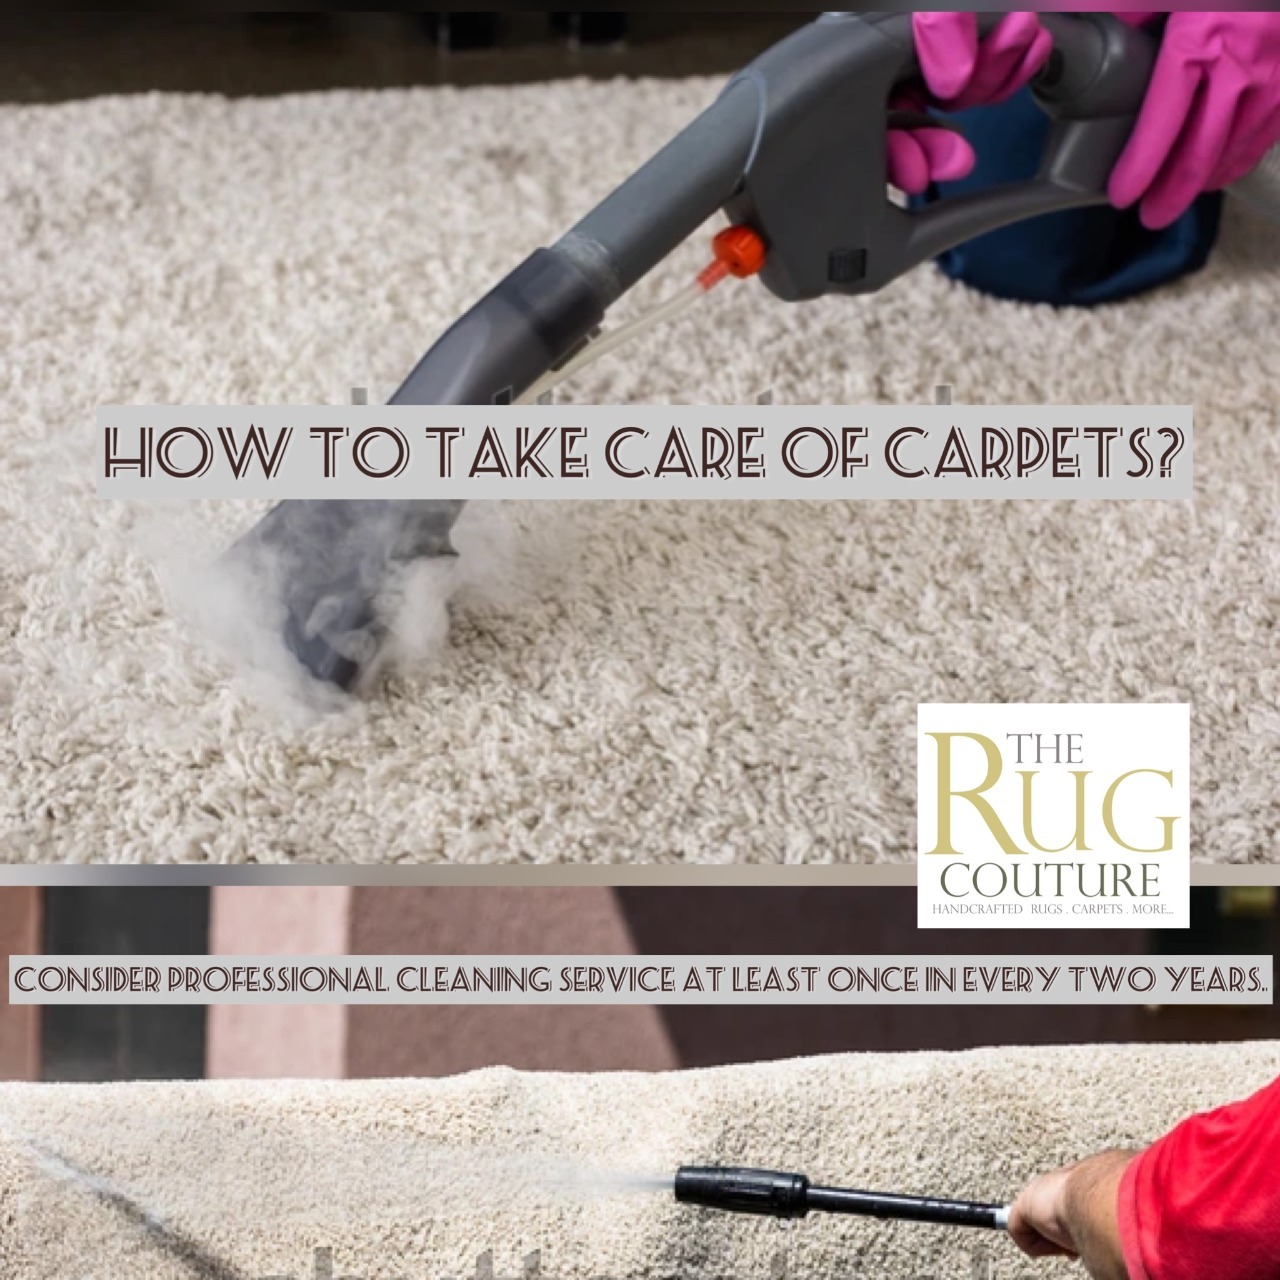 How to take care of carpets?